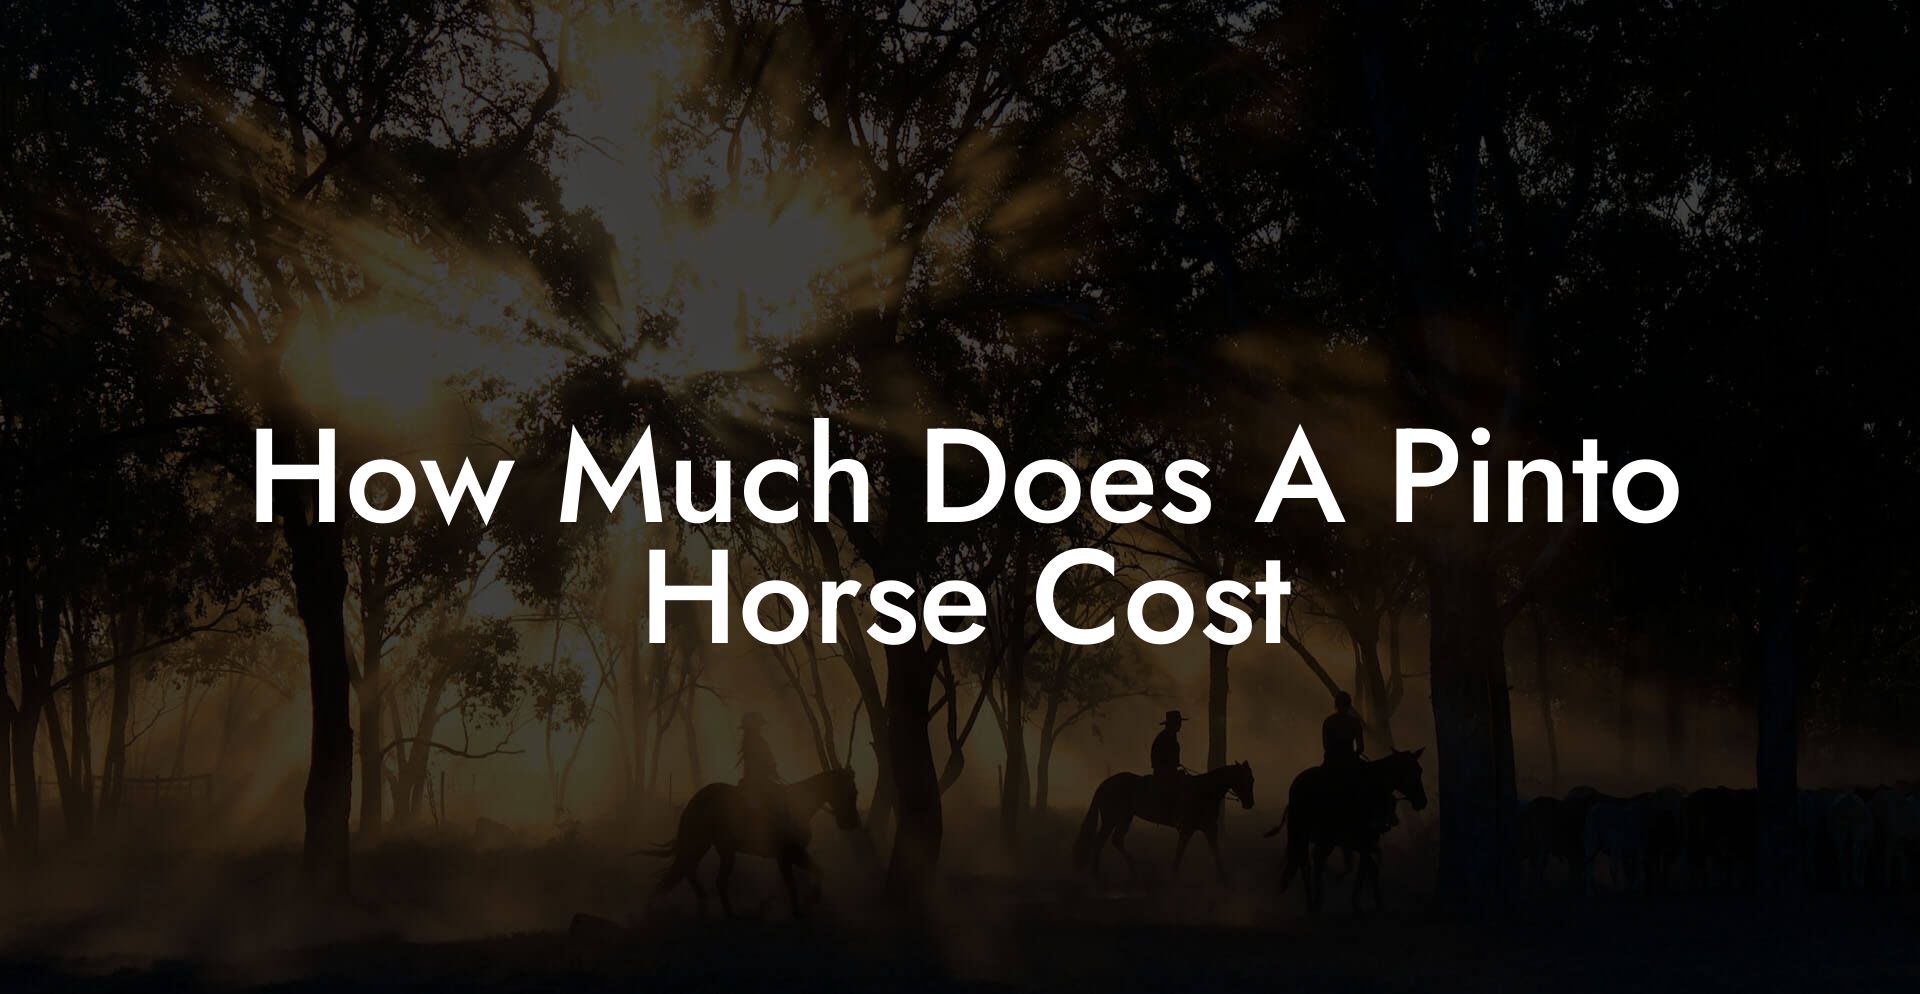 How Much Does A Pinto Horse Cost